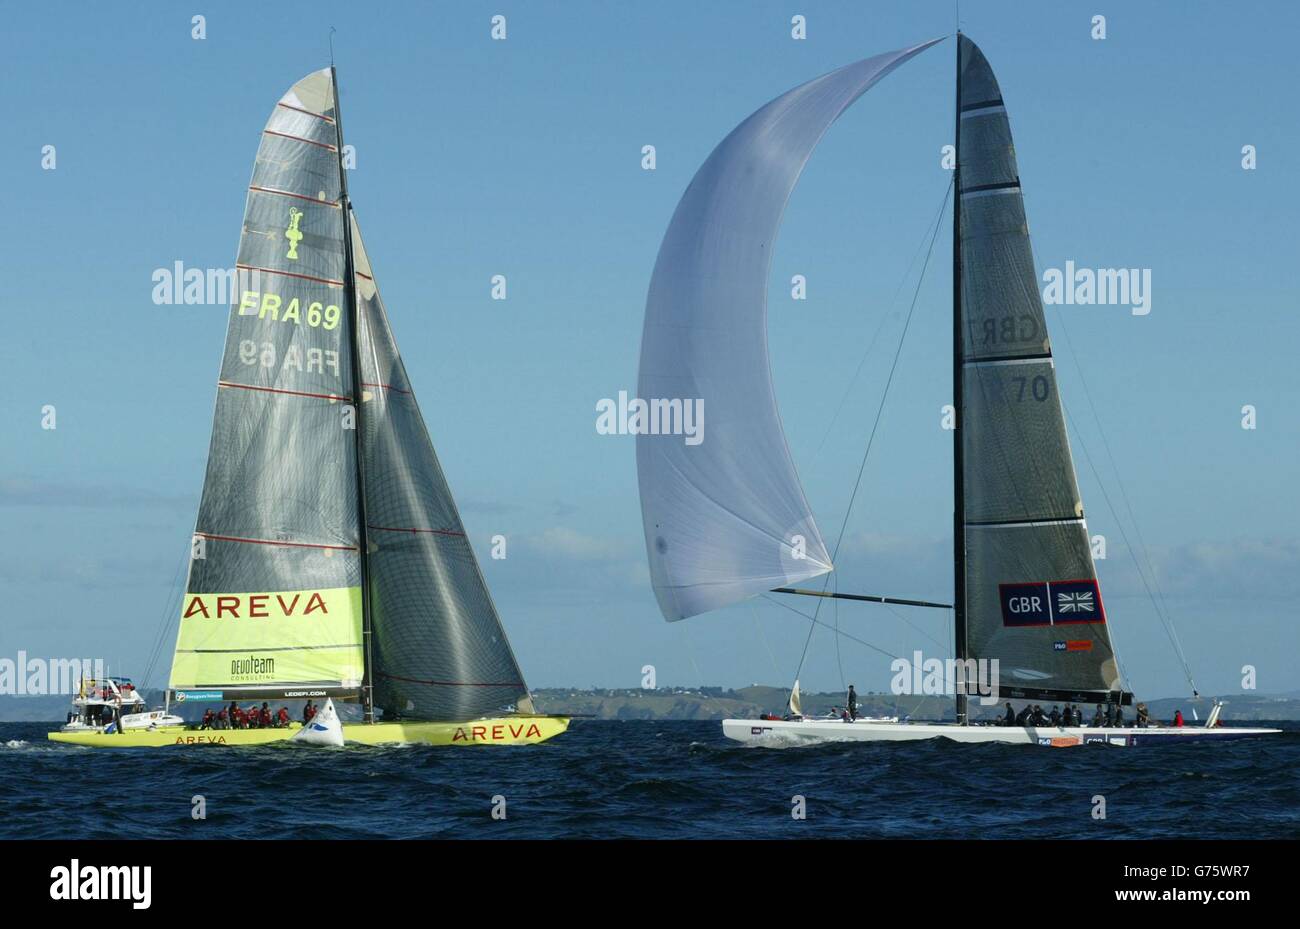 Britain's America's Cup team GBR Challenge (right) cruises across the finish line in the Hauraki Gulf off Auckland, New Zealand as the French yacht Le Defi Areva perfoms a penalty turn on the line. Winning by just 13 seconds, it was GBR's first point in three races. Stock Photo